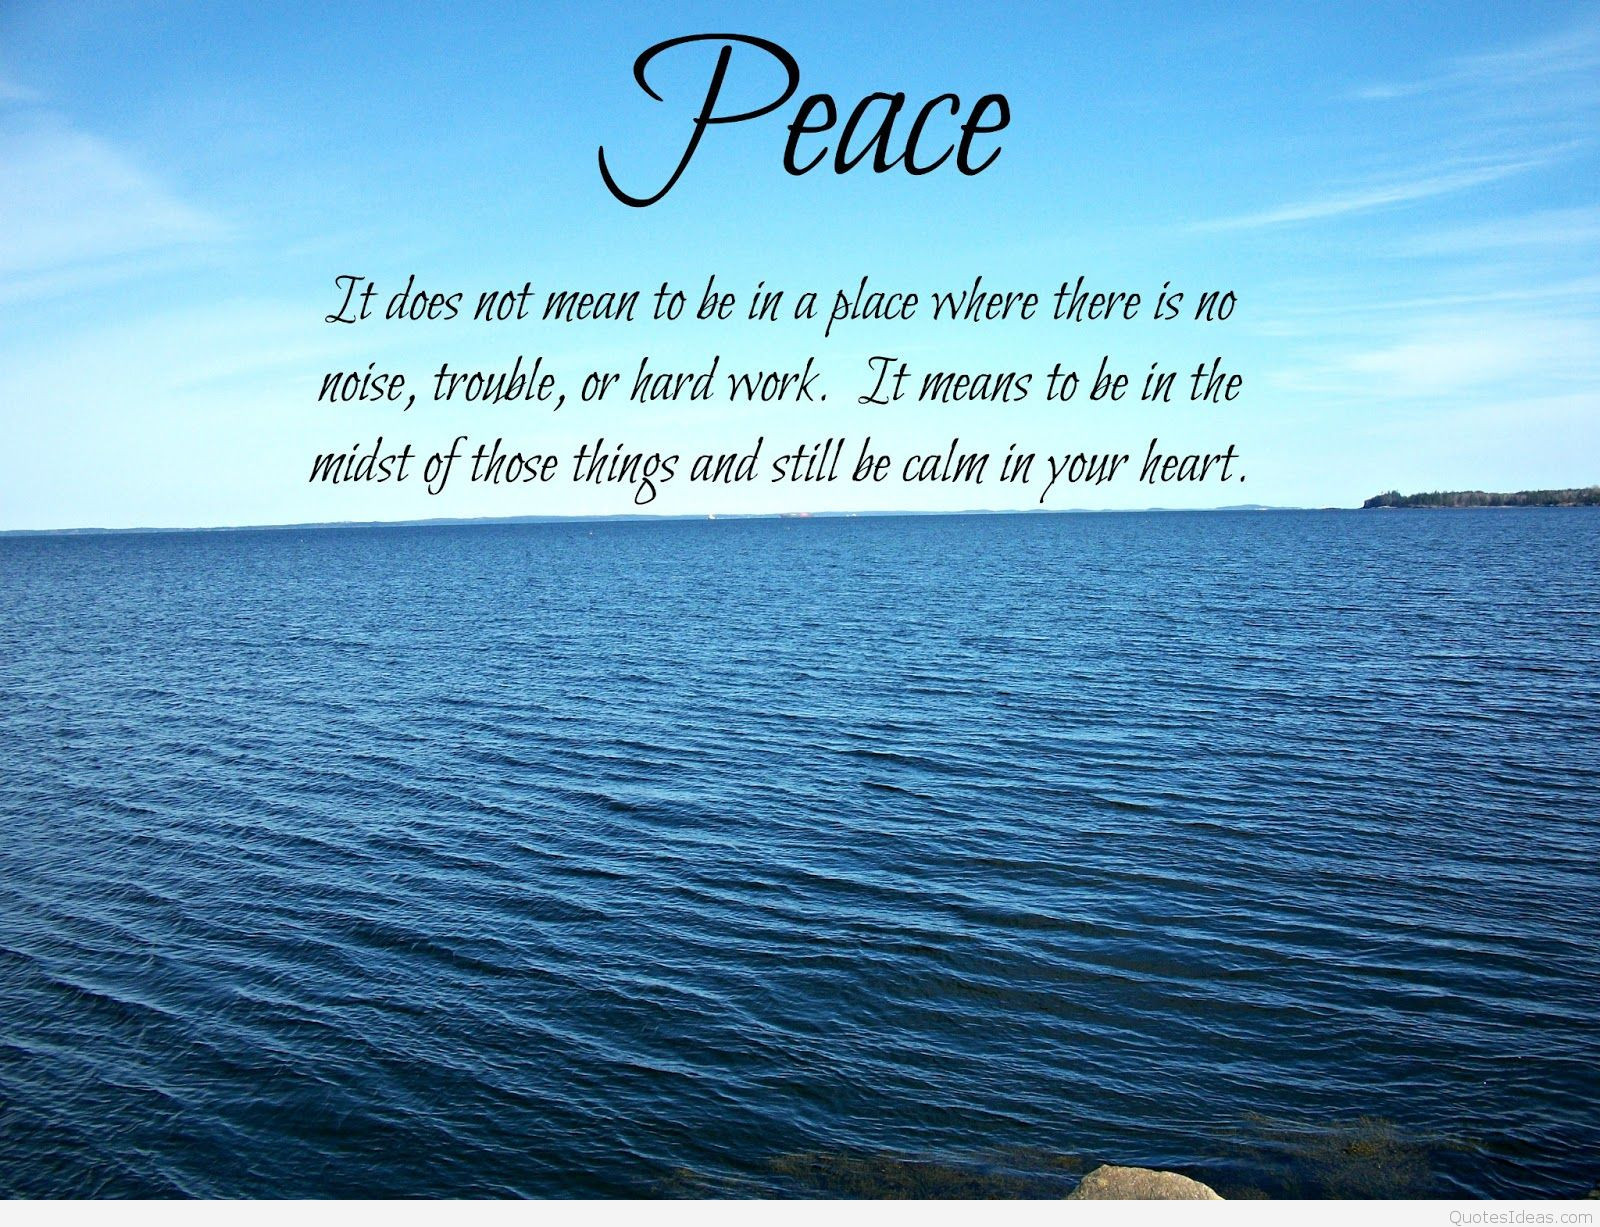 Pictures Of Inspirational Quotes
 Awesome peace quote HD 2015